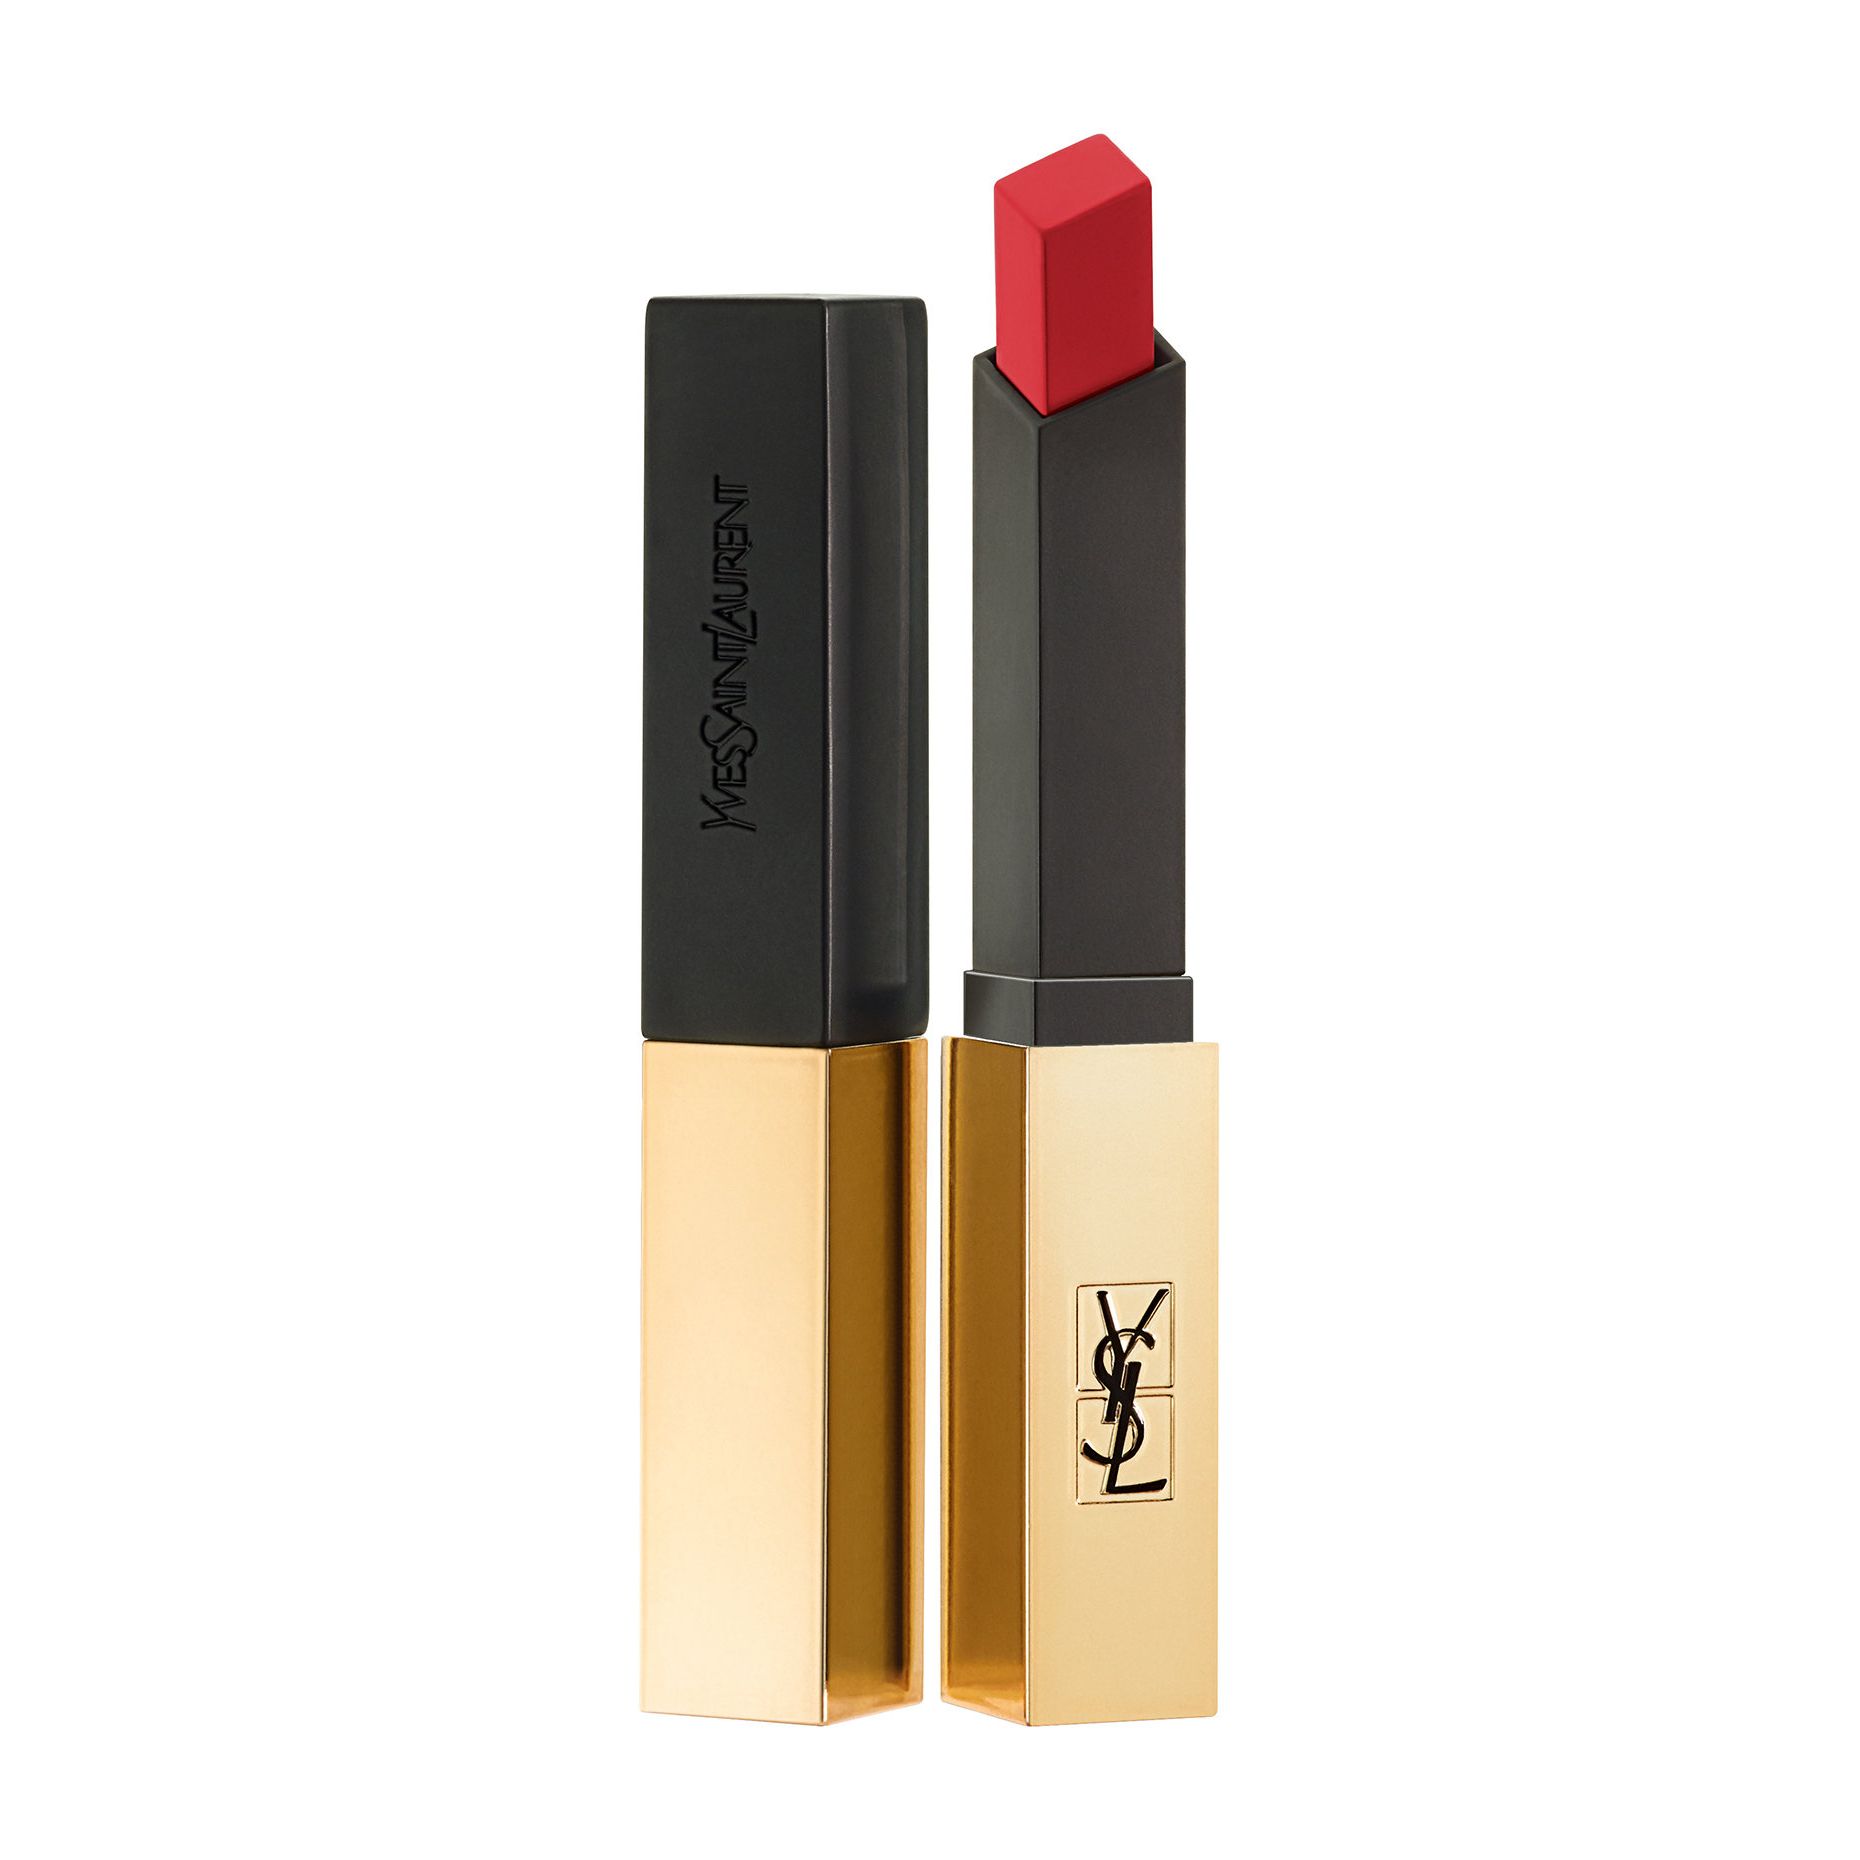 Помада для губ YVES SAINT LAURENT Rouge Pur Couture The Slim, 23 Mystery Red, 2,2 г помада для губ yves saint laurent rouge pur couture the slim 416 psychic chili 2 2 г